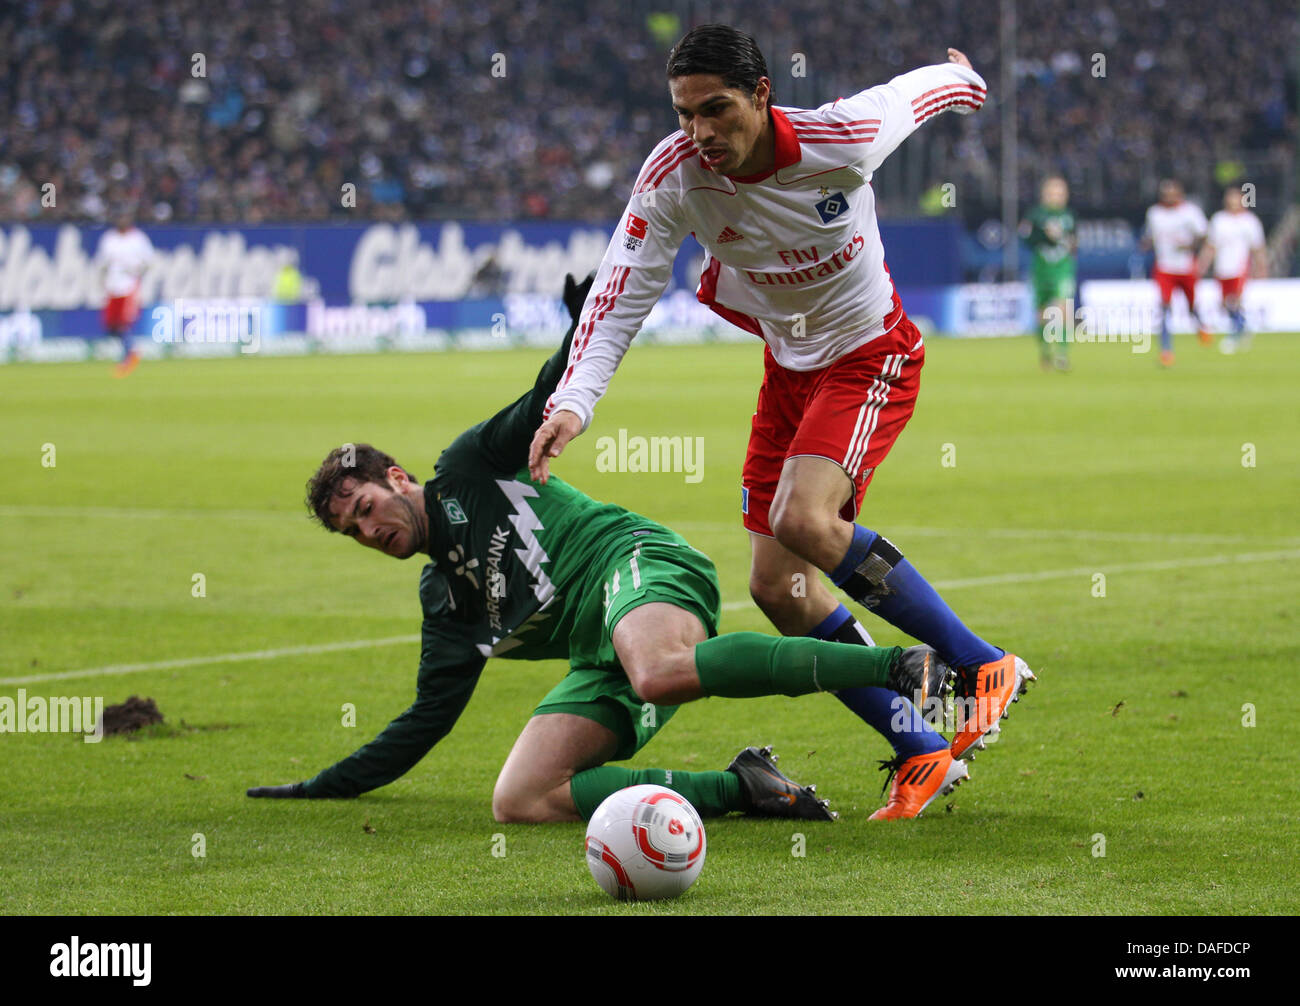 Bremen's Dominik Schmidt (L) is locked in a battel for the ball with Hamburg's Jose Paolo Guerrero during the Bundesliga soccer match between Hamburger SV and Werder Bremen at the Imtech-Arena in Hamburg, Germany, 19 Februar 2011. Hamburg won the match 4-0. Photo: Friso Gentsch Stock Photo